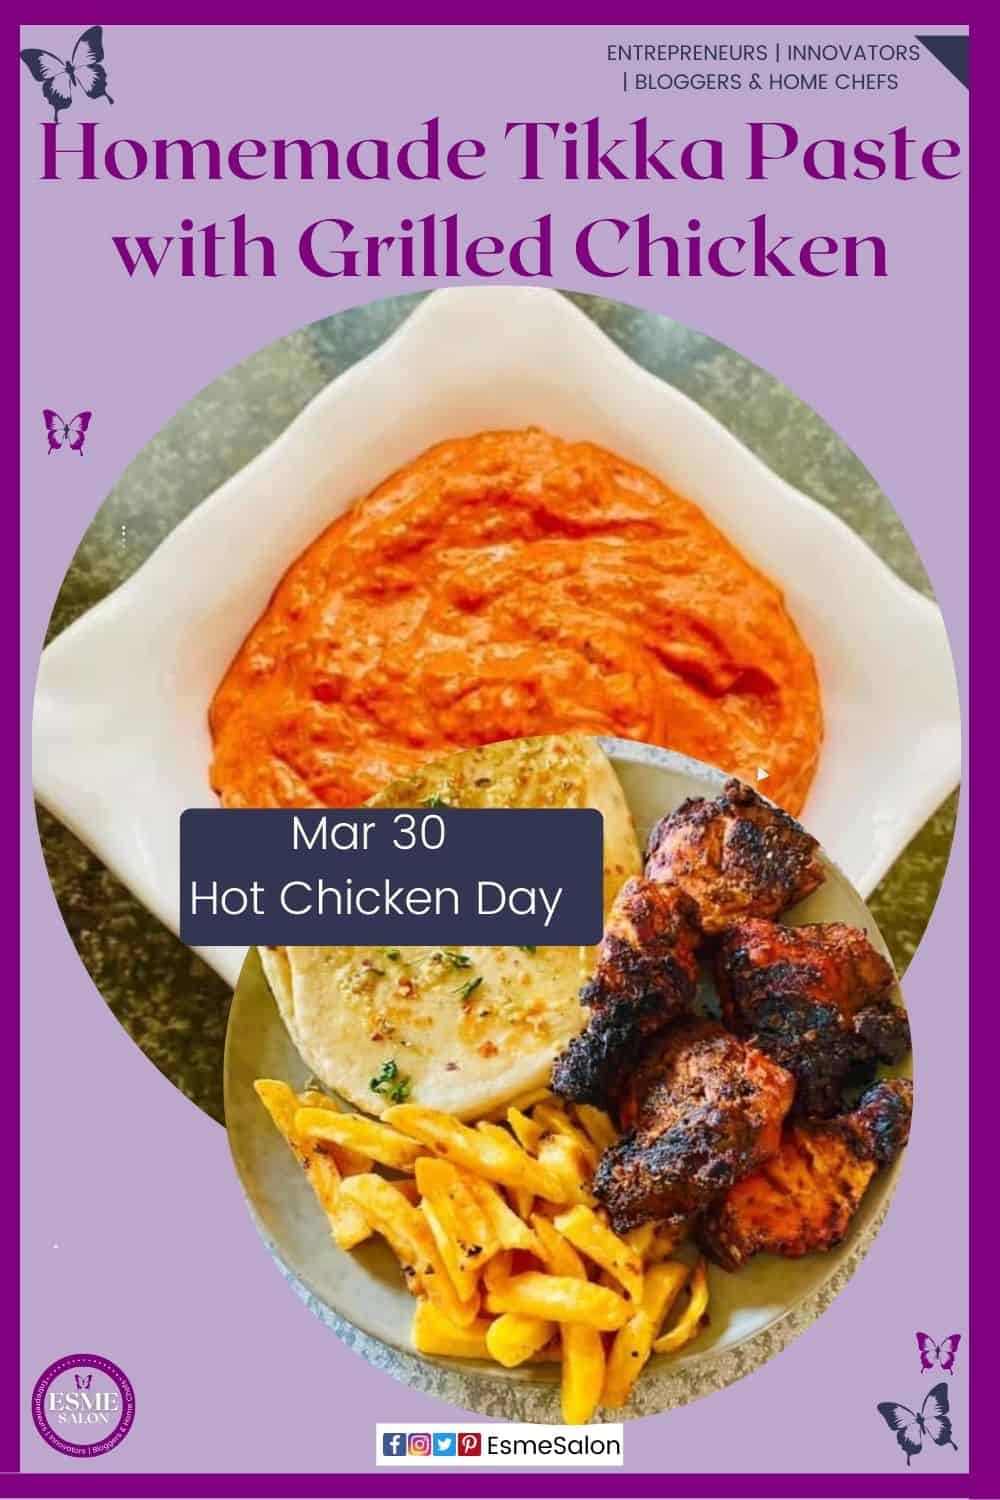 an image of a white square dish with Homemade Tikka Paste and a plate filled with Grilled Chicken lathered with Tikka Paste, and fries on the side as well as Chili Garlic Naan Bread